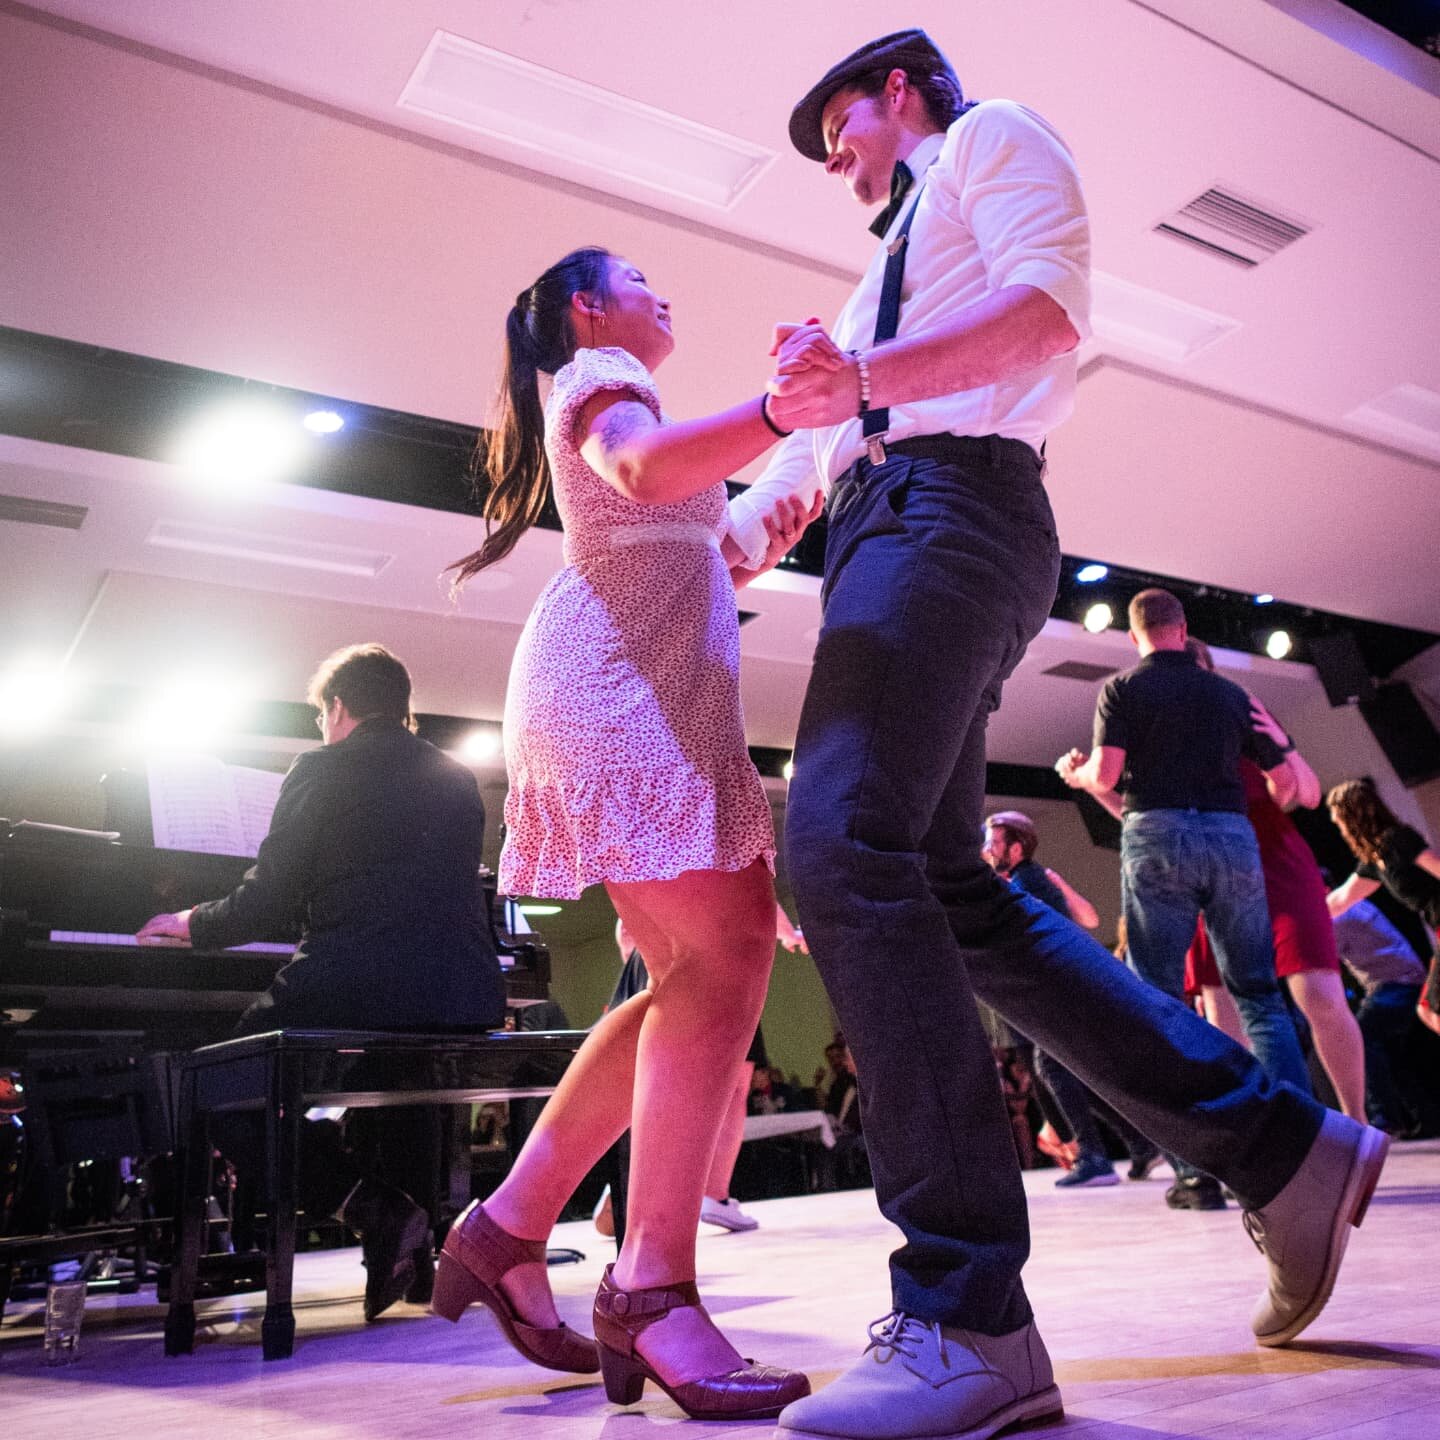 Another lovely evening with @cosmoyeg at their Dance Party event with @sugarswing 

#yeg #yegevents #yegdance #yeglive #yeglocal #yegphotographer #yegdate